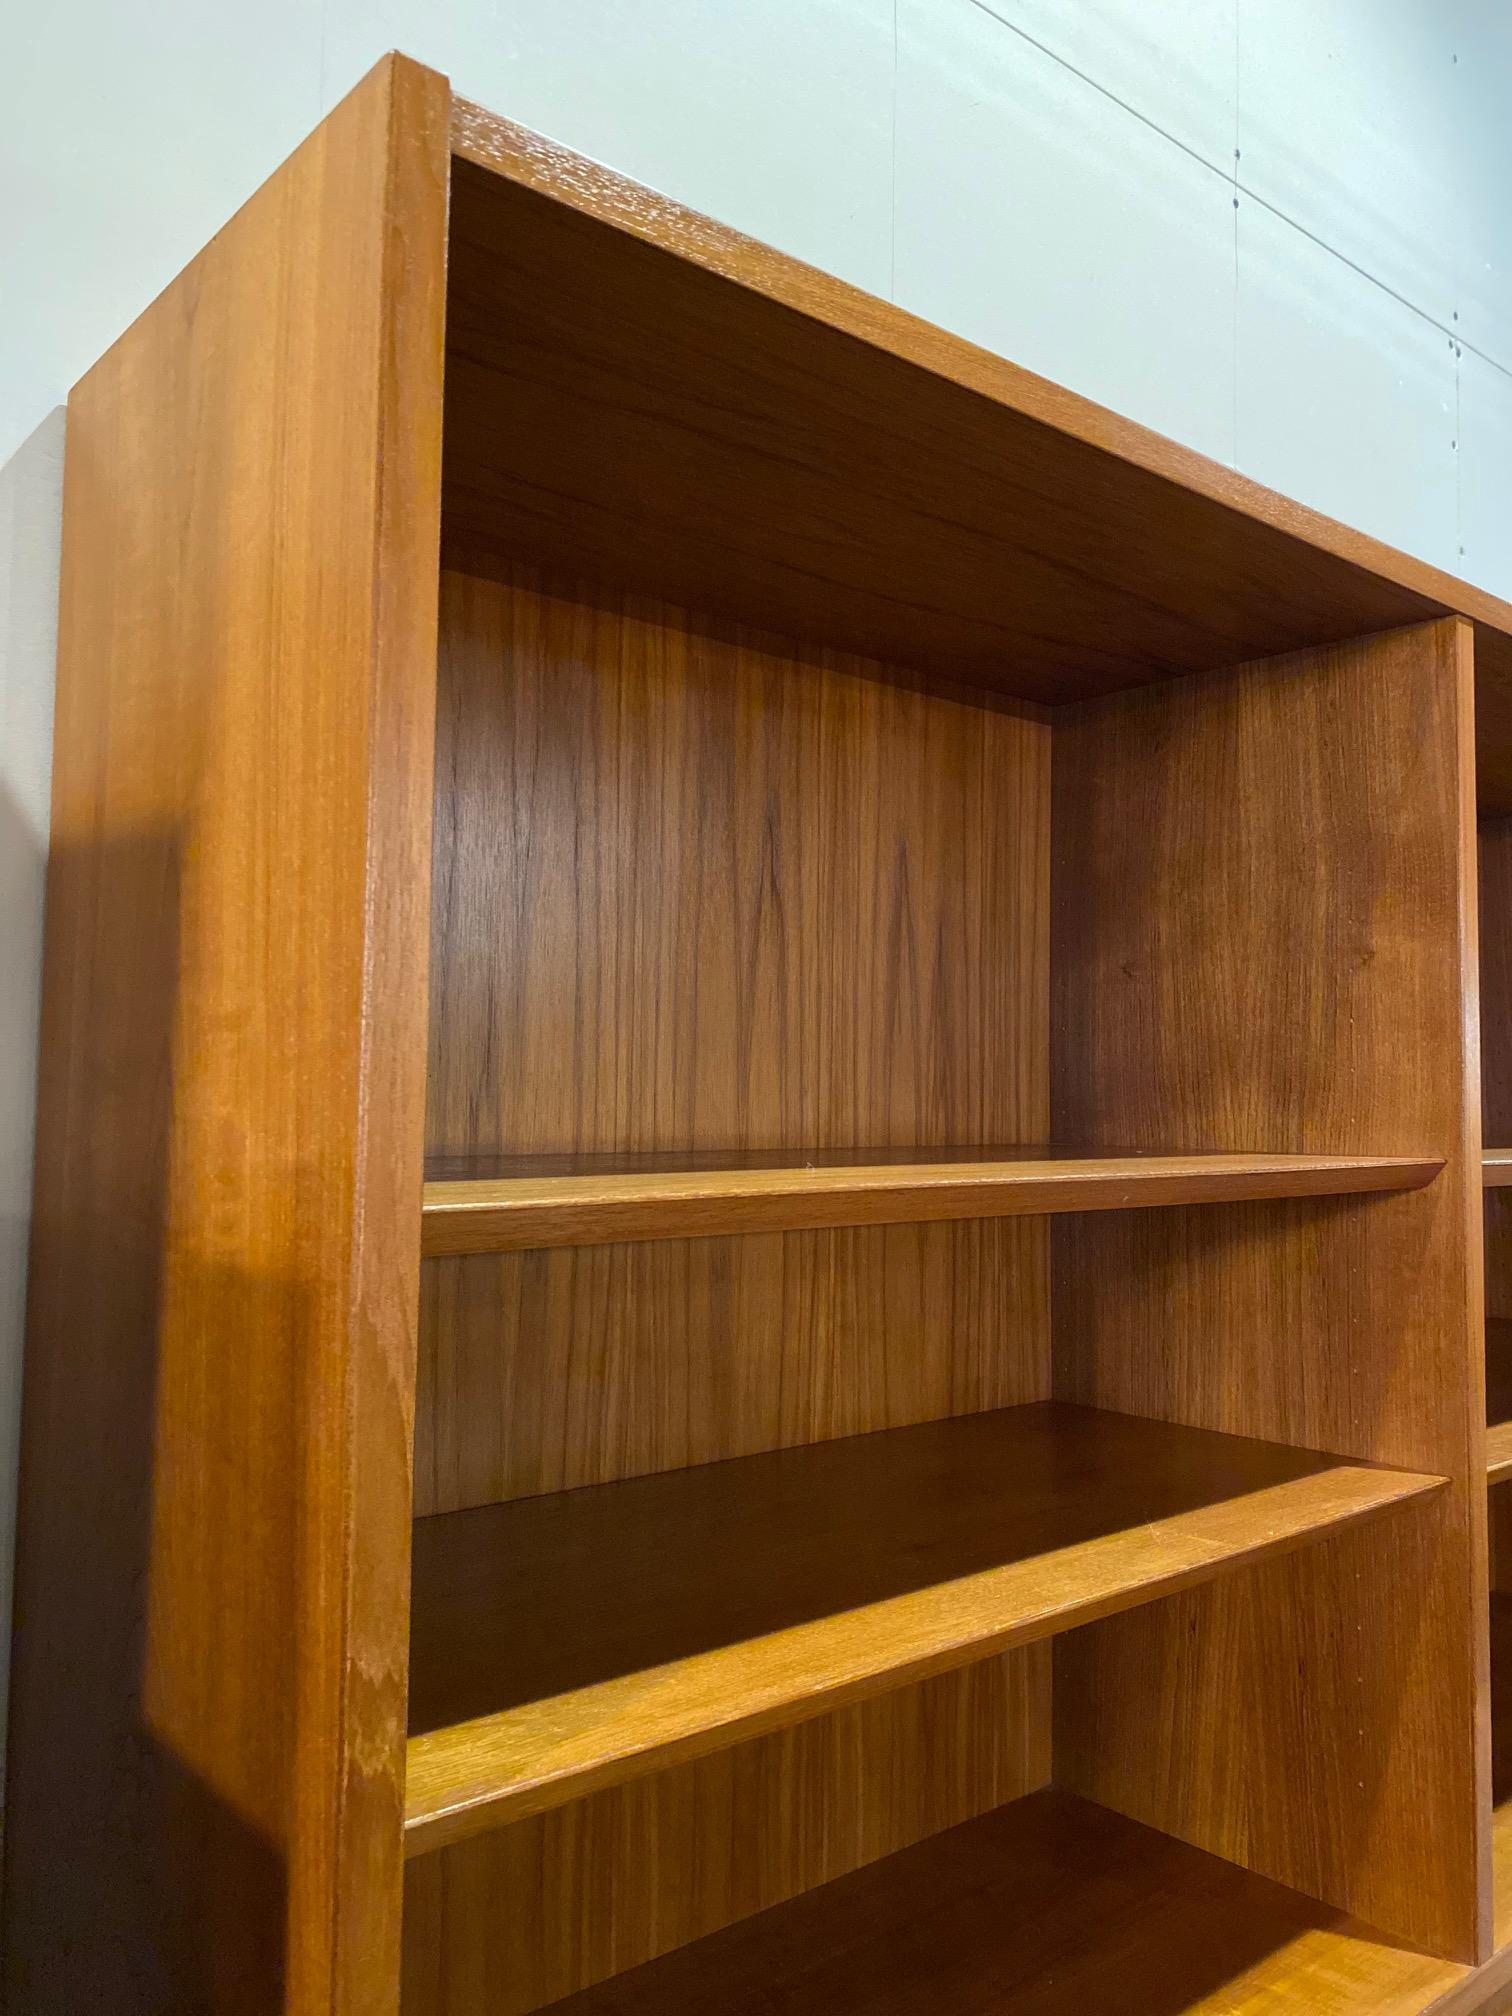 Mid-century Danish bookcase in teak by Carlo Jensen for Hundevad features a bookcase with drop desk. This bookcase comes in two pieces, shelving on top and drop down desk with sliding doors on bottom that include pull out trays. Bottom tray is lined